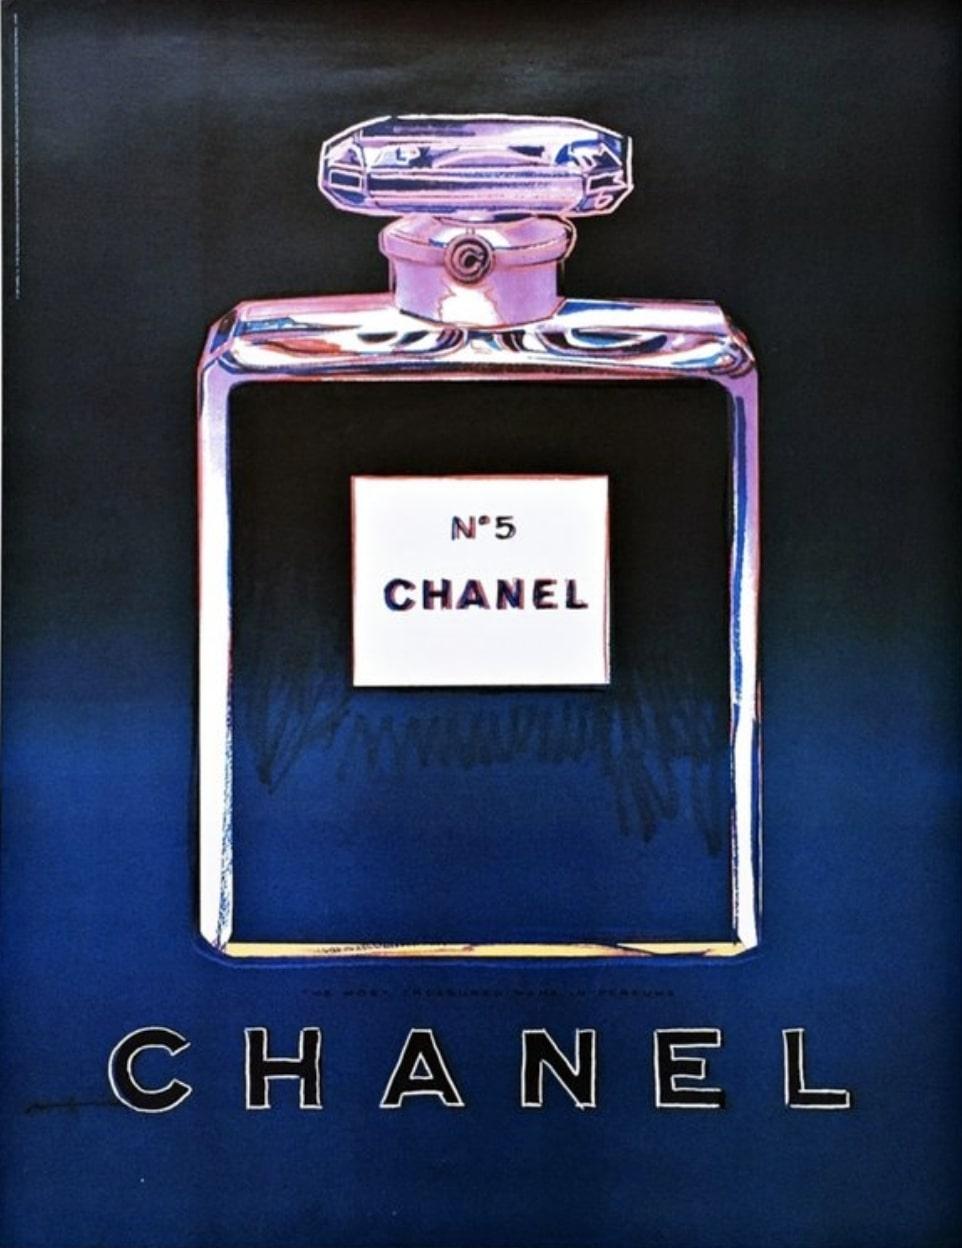 Andy Warhol created this image for Chanel in the 1980's but it was not until 1997 that Chanel decided to use it as a publicity in their add campaigns. This size which was given out in department stores to customers who purchased Chanel N5 Perfume.